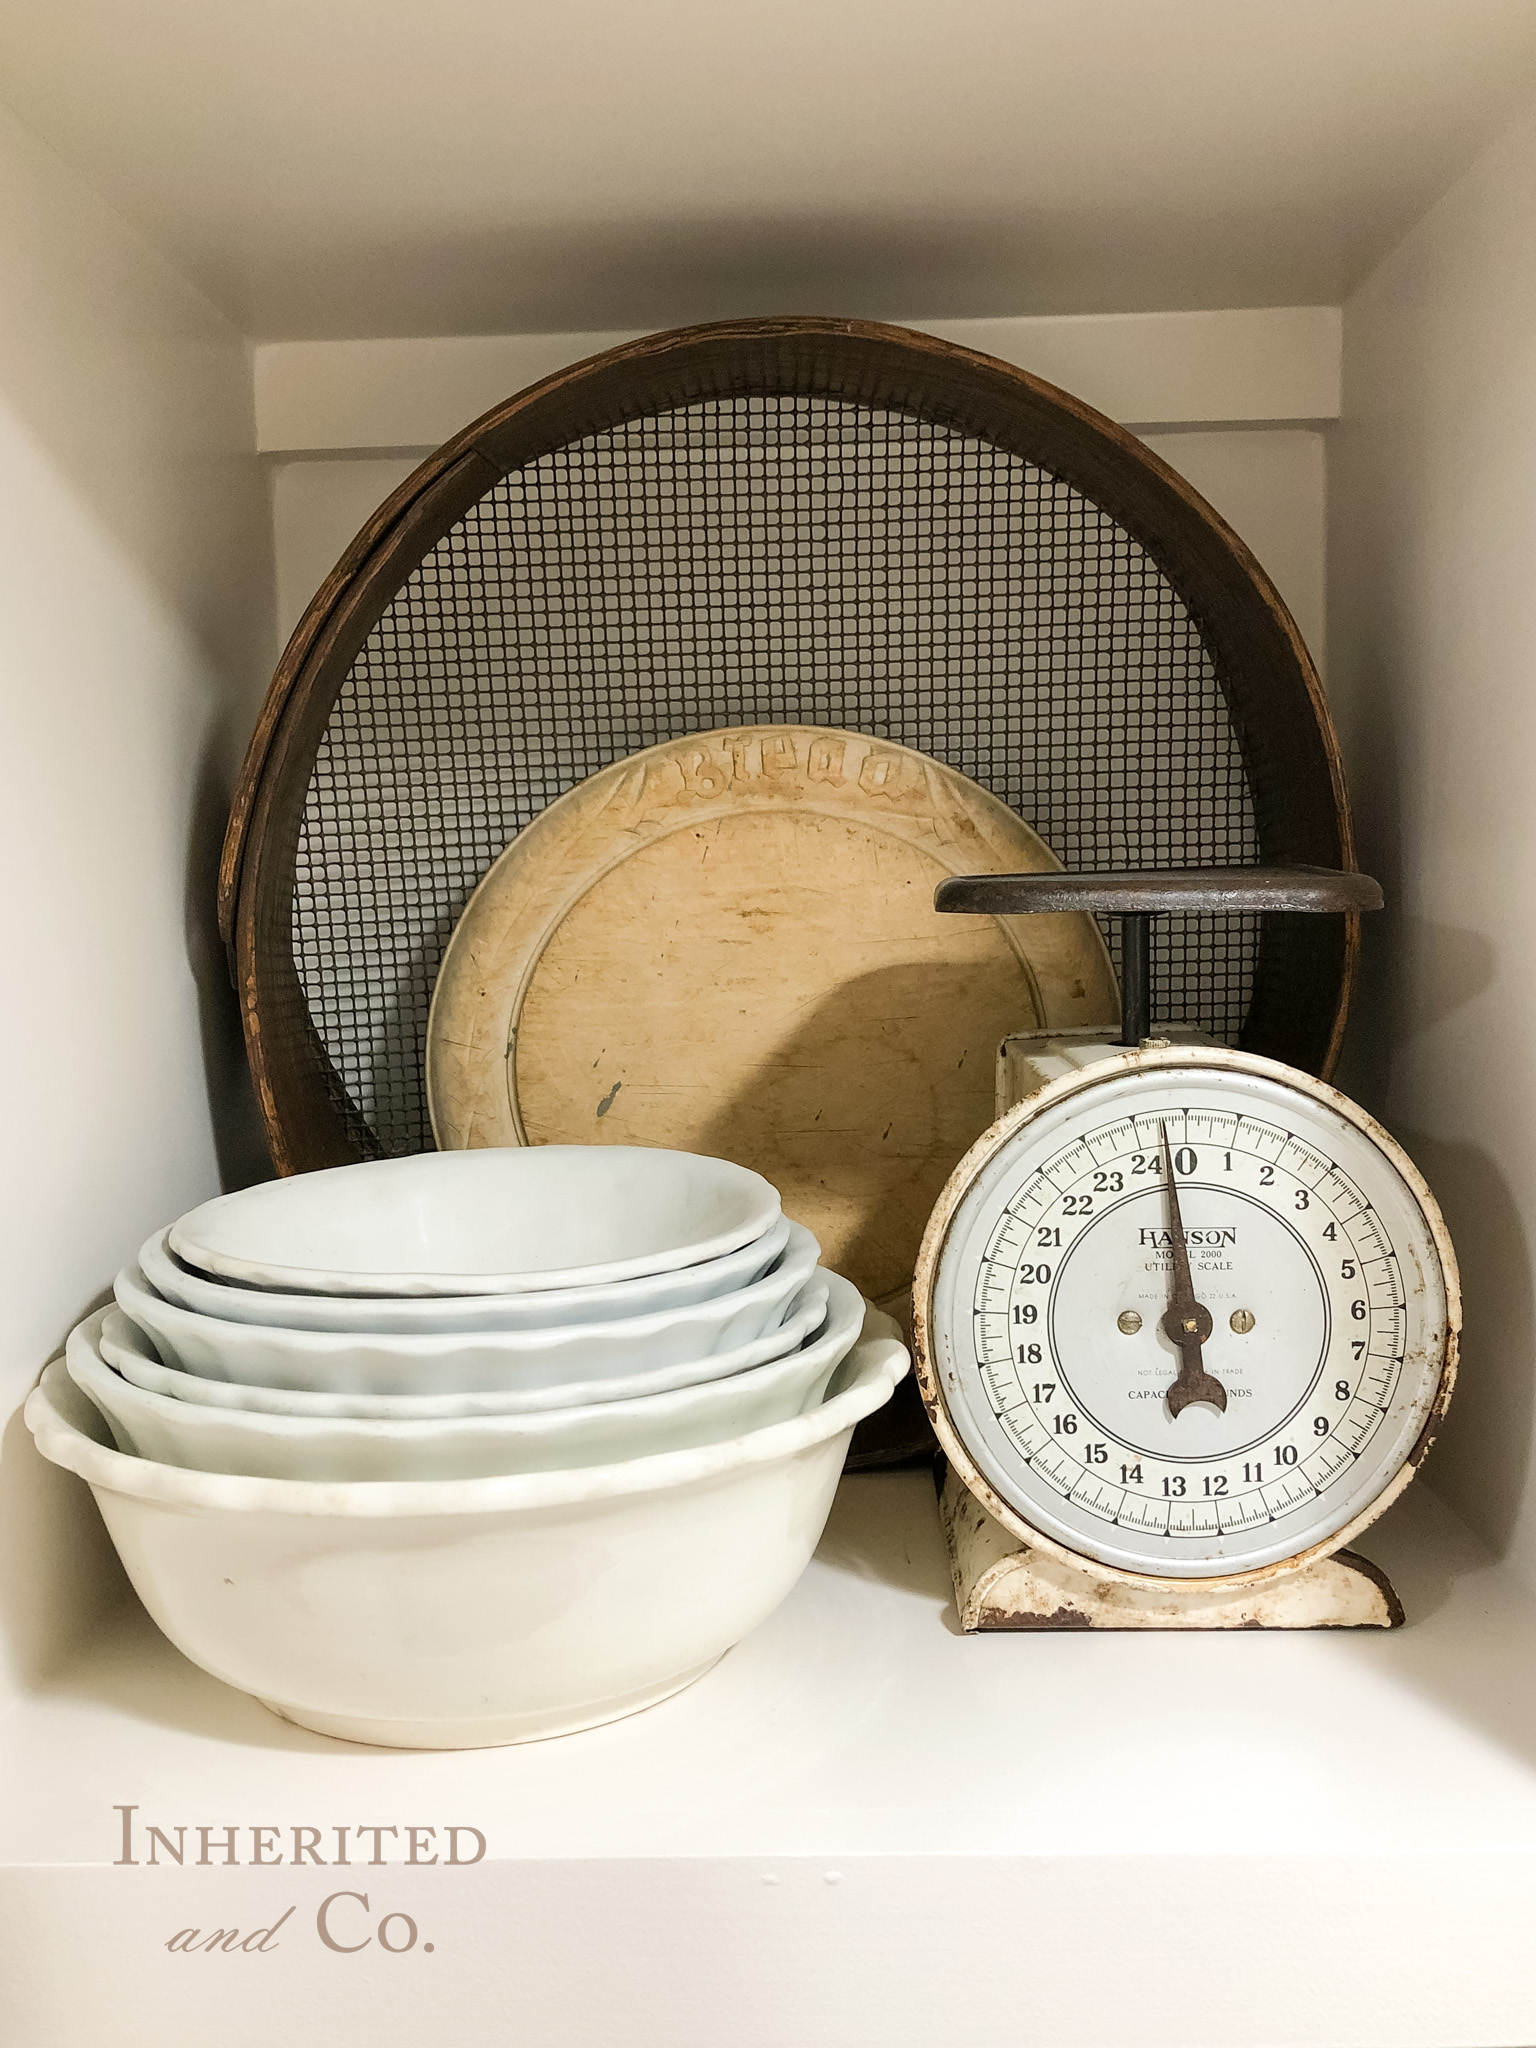 vignette of ironstone bowls, kitchen scale, bread board, and sieve